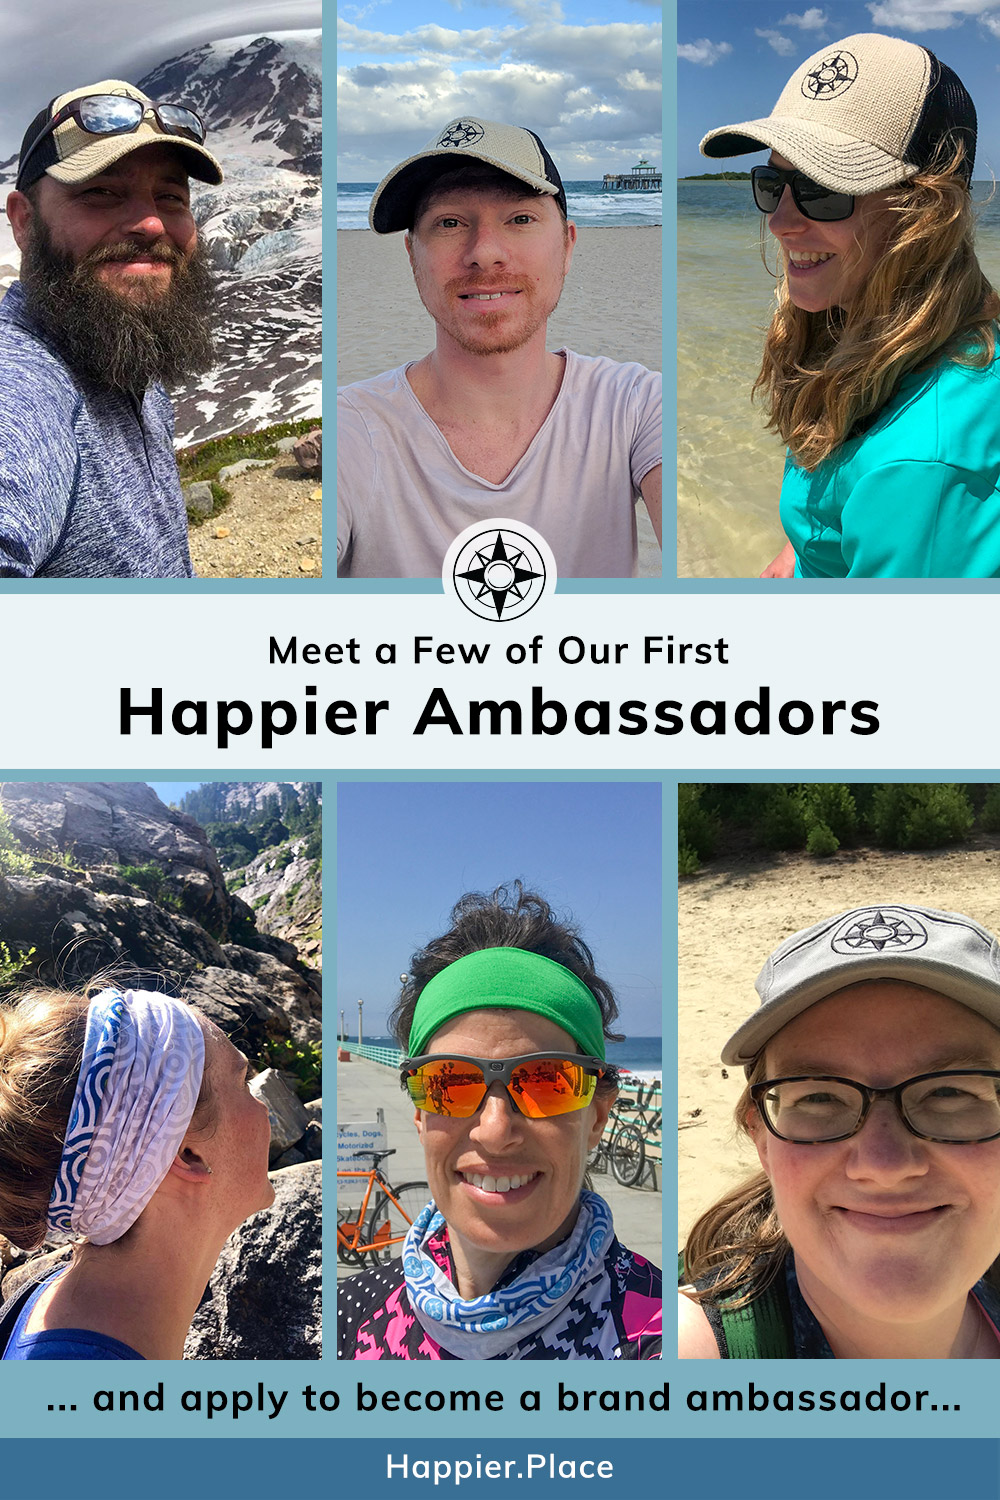 Meet our first Happier Ambassadors: Jake, Adam, Kate, Judith, Lisa, and Danielle... and apply to become a #HappierPlace #BrandAmbassador!